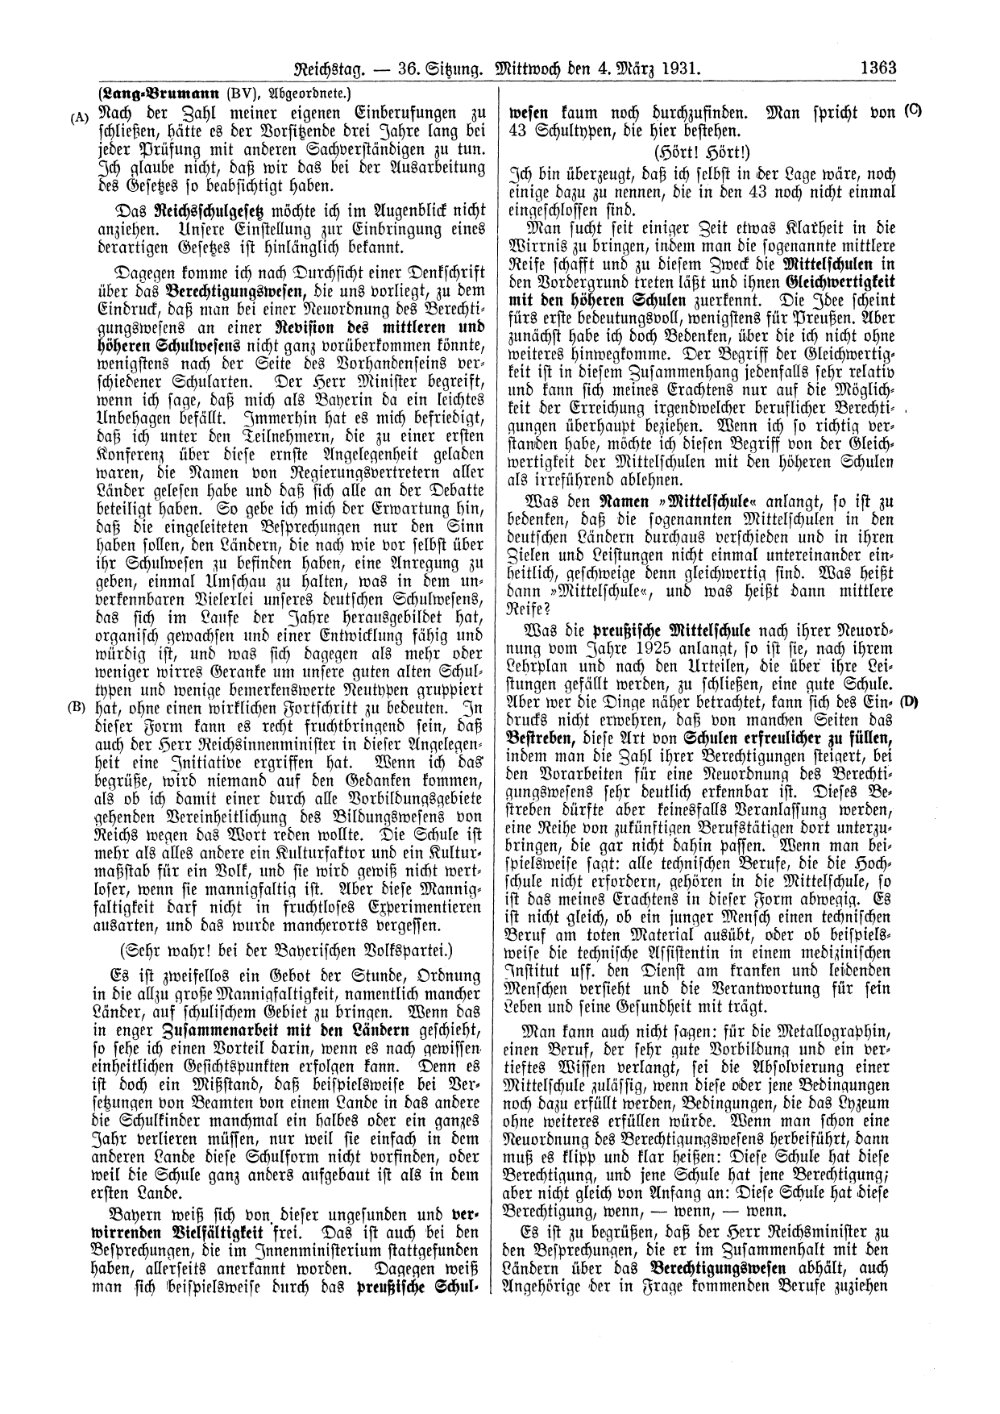 Scan of page 1363